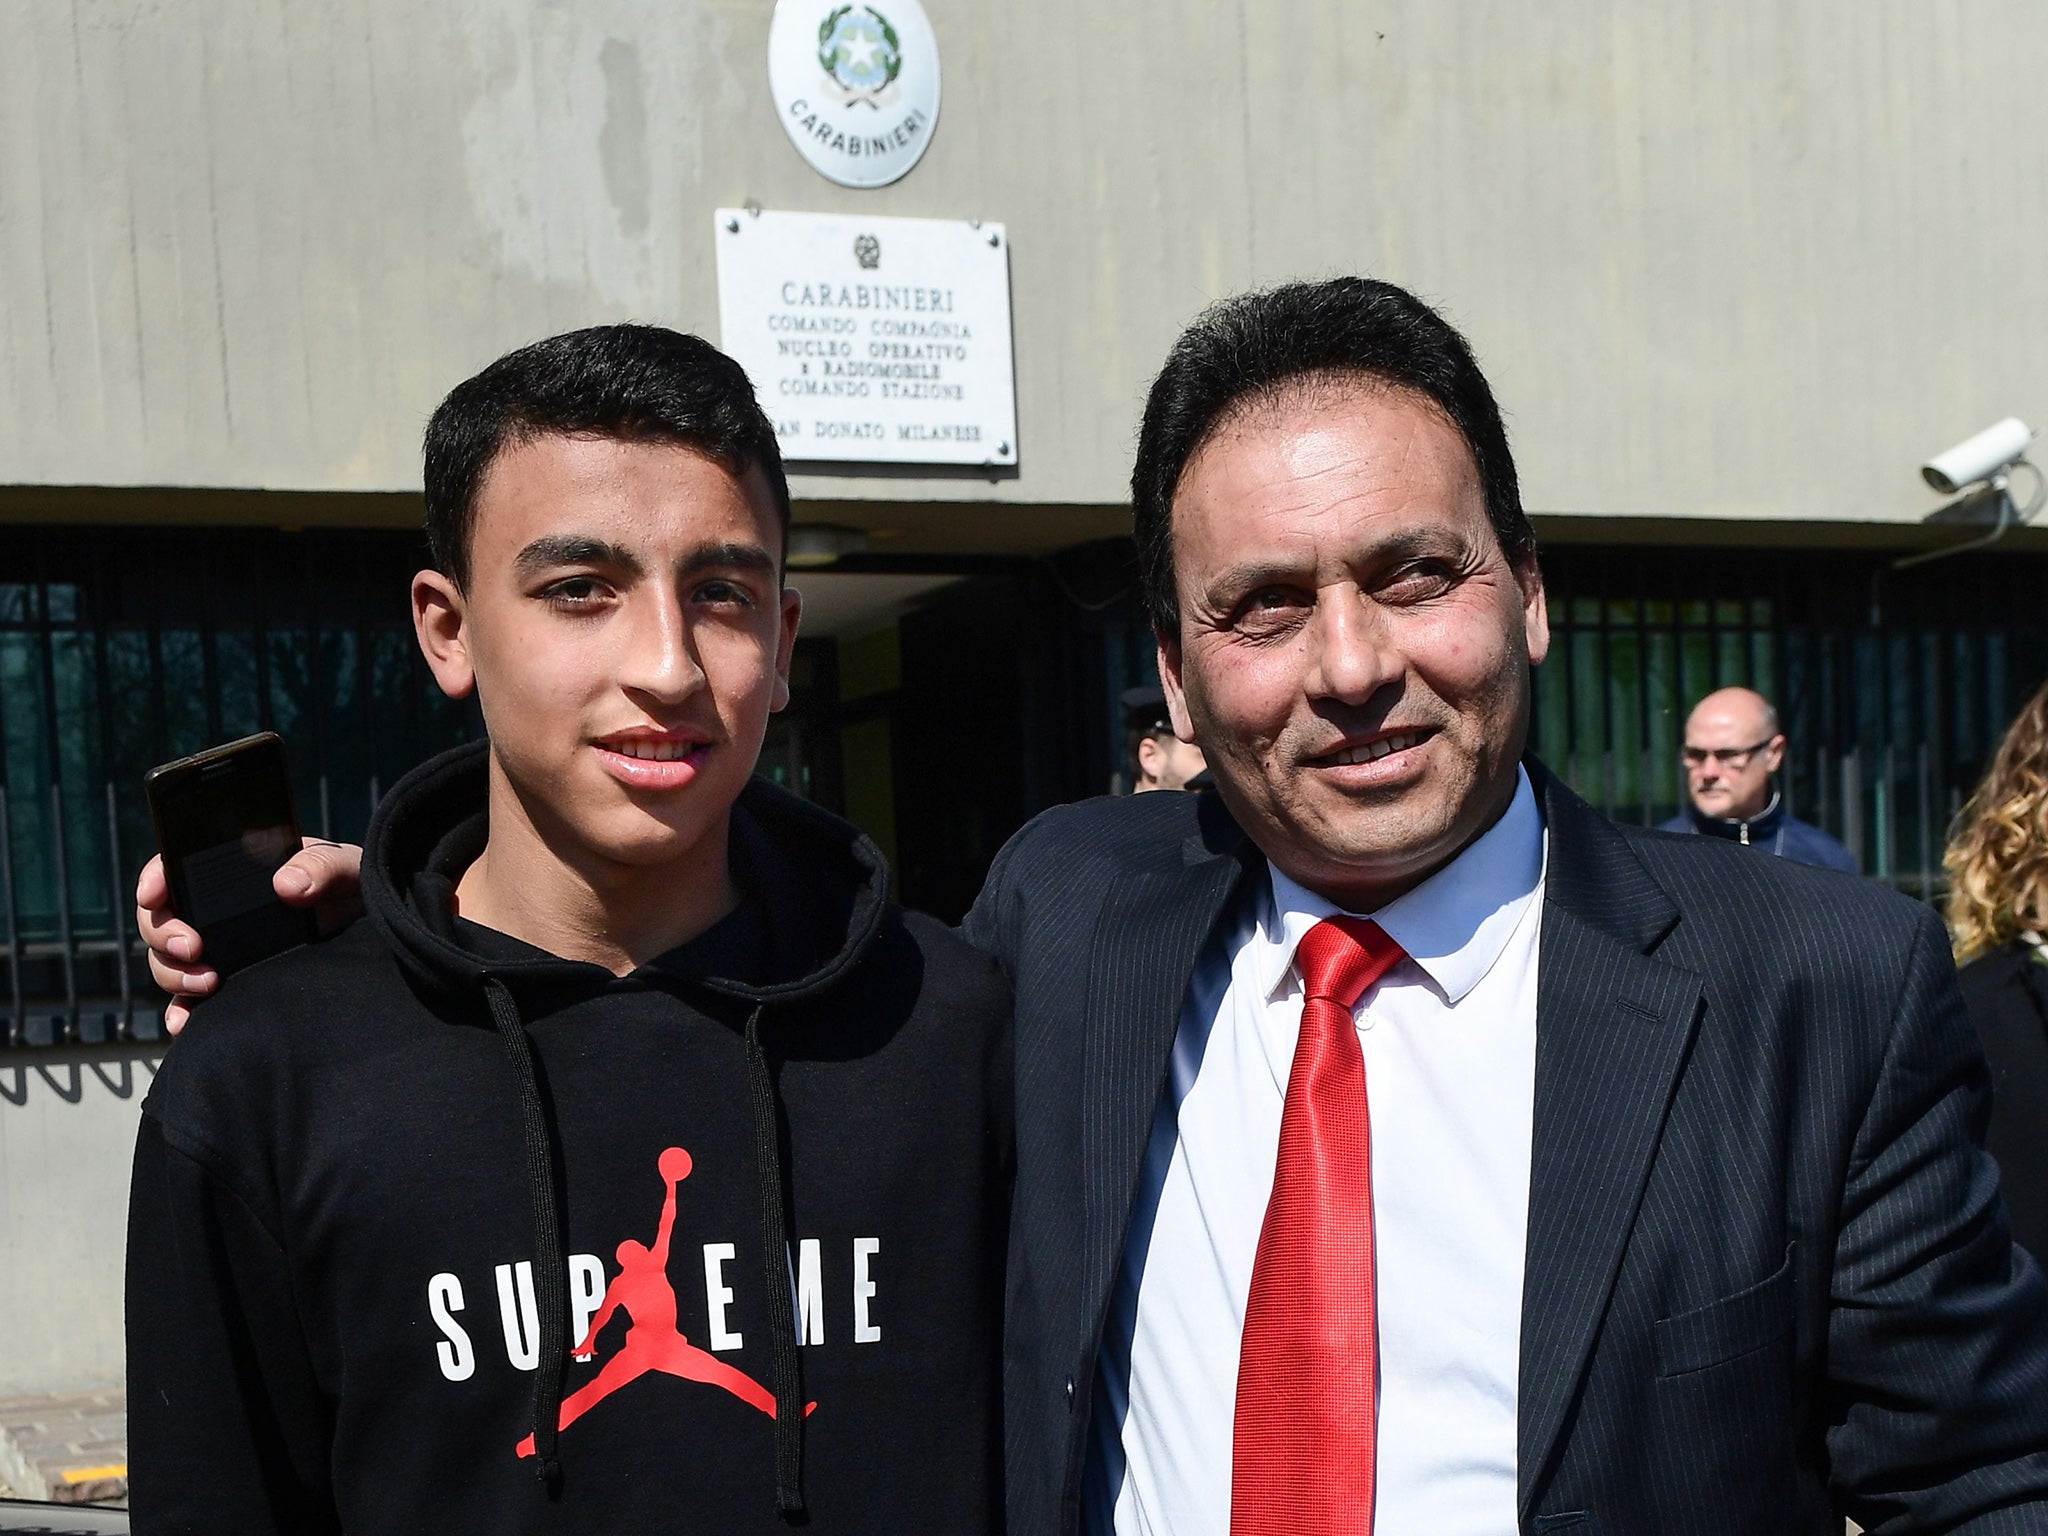 Italy to grant citizenship to 13-year-old Egyptian boy who saved children on hijacked school bus The Independent The Independent picture